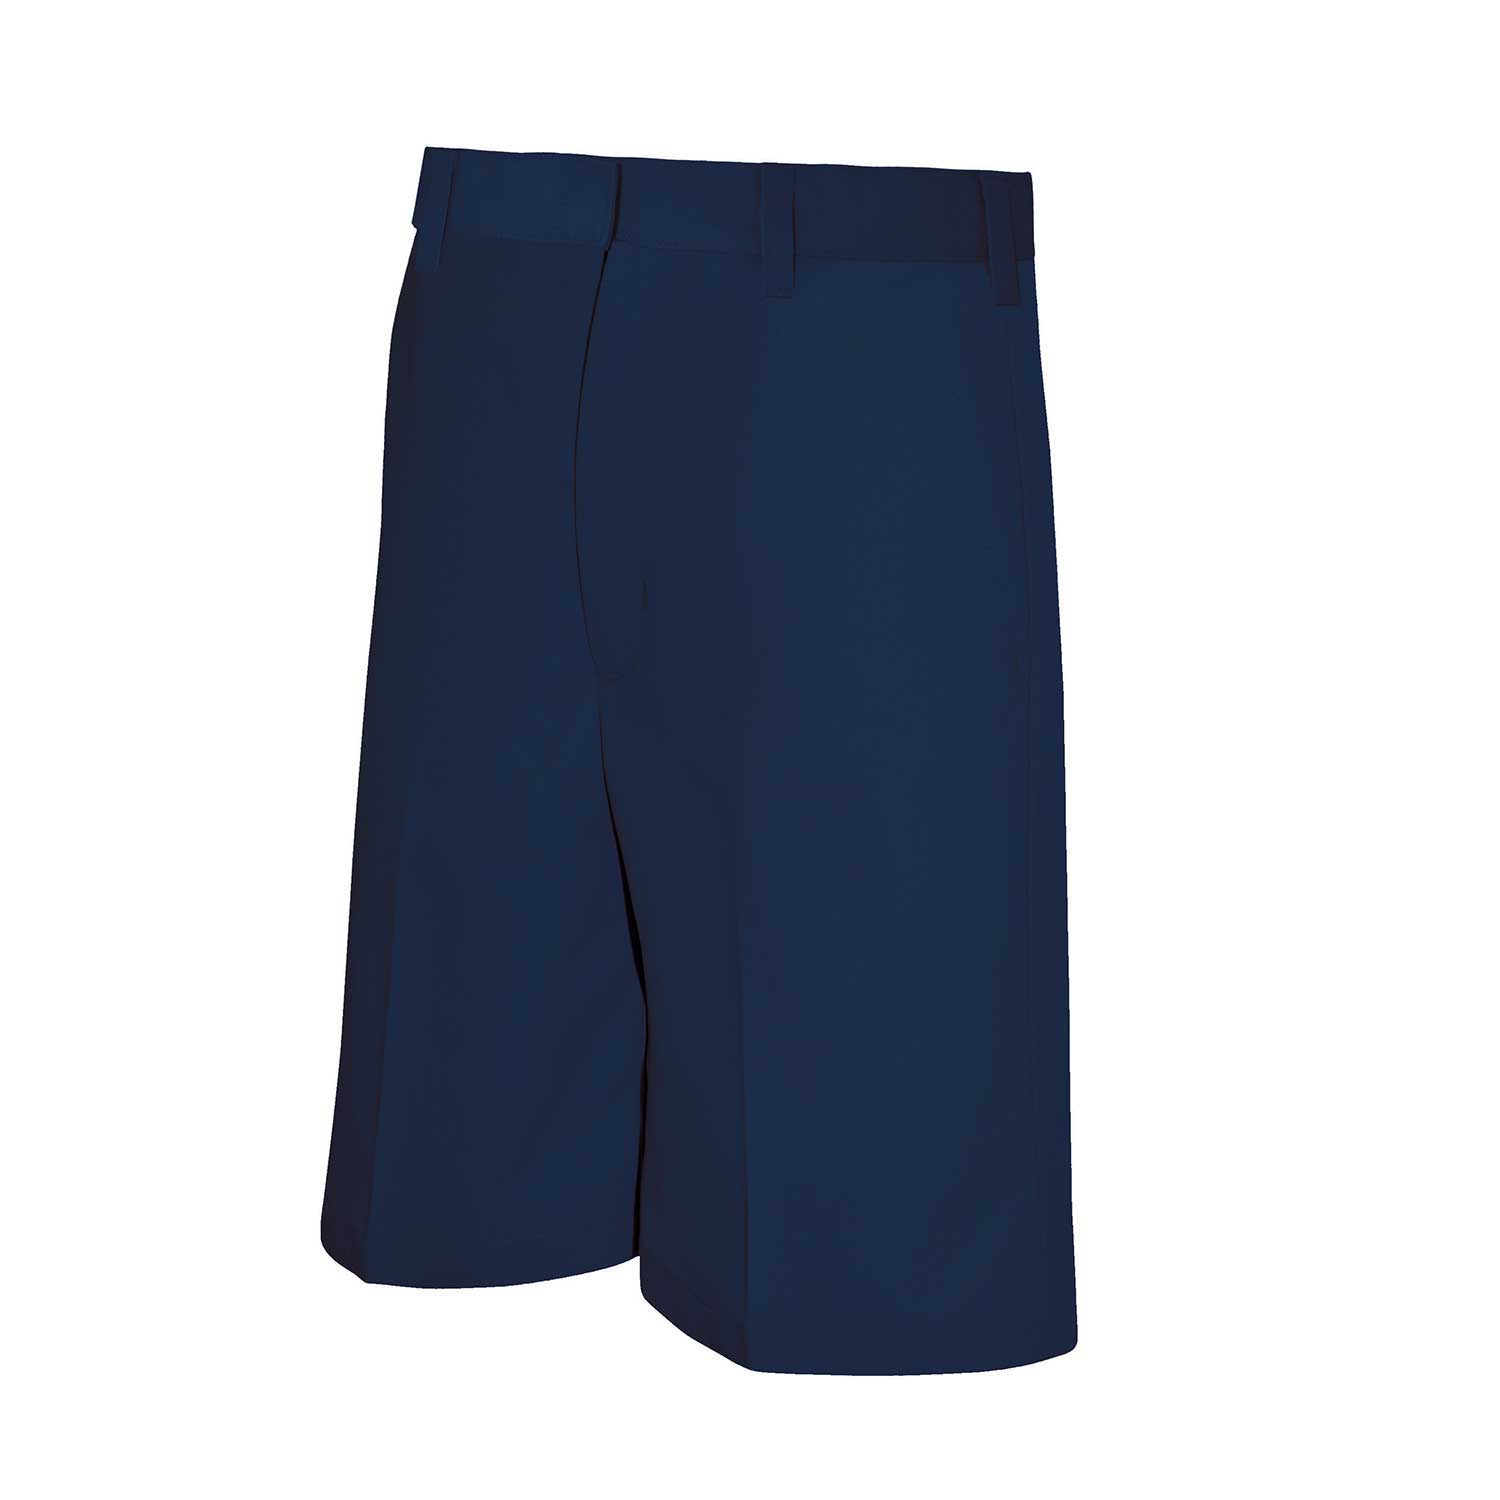 Boys Relaxed Fit Twill Shorts - Flat Front - #7099/7031 - Navy Blue